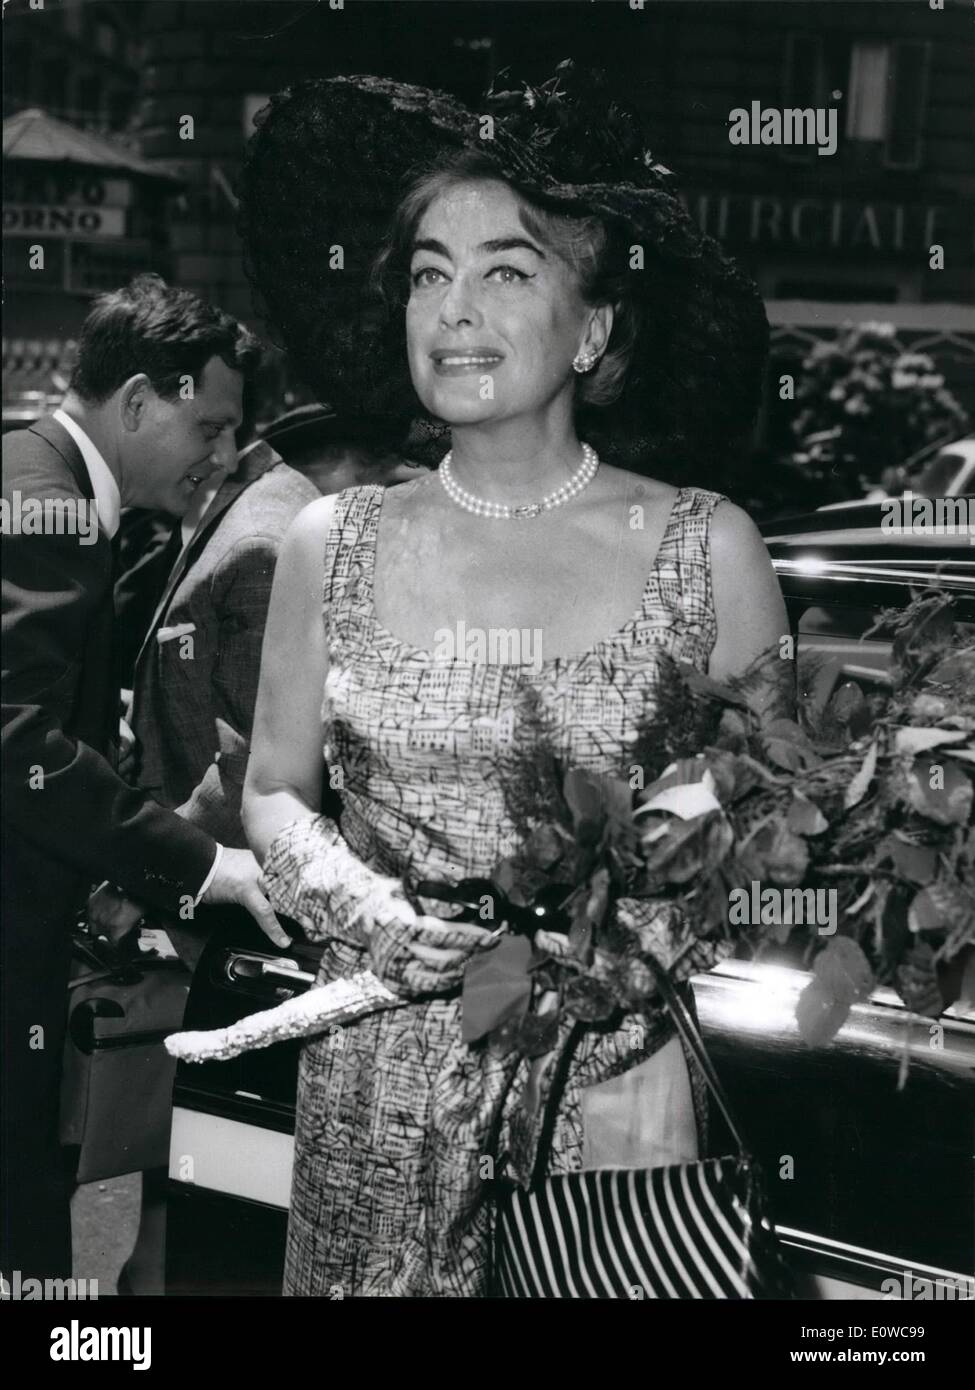 May 05, 1962 - Joan Crawford the famous american actress now become a healthy industrial on Pepsi Cola industry arrived to Rome, this morning, she will continue her business journey to Torino, Venice and Treiste. As always she appeared still young and charming. Stock Photo